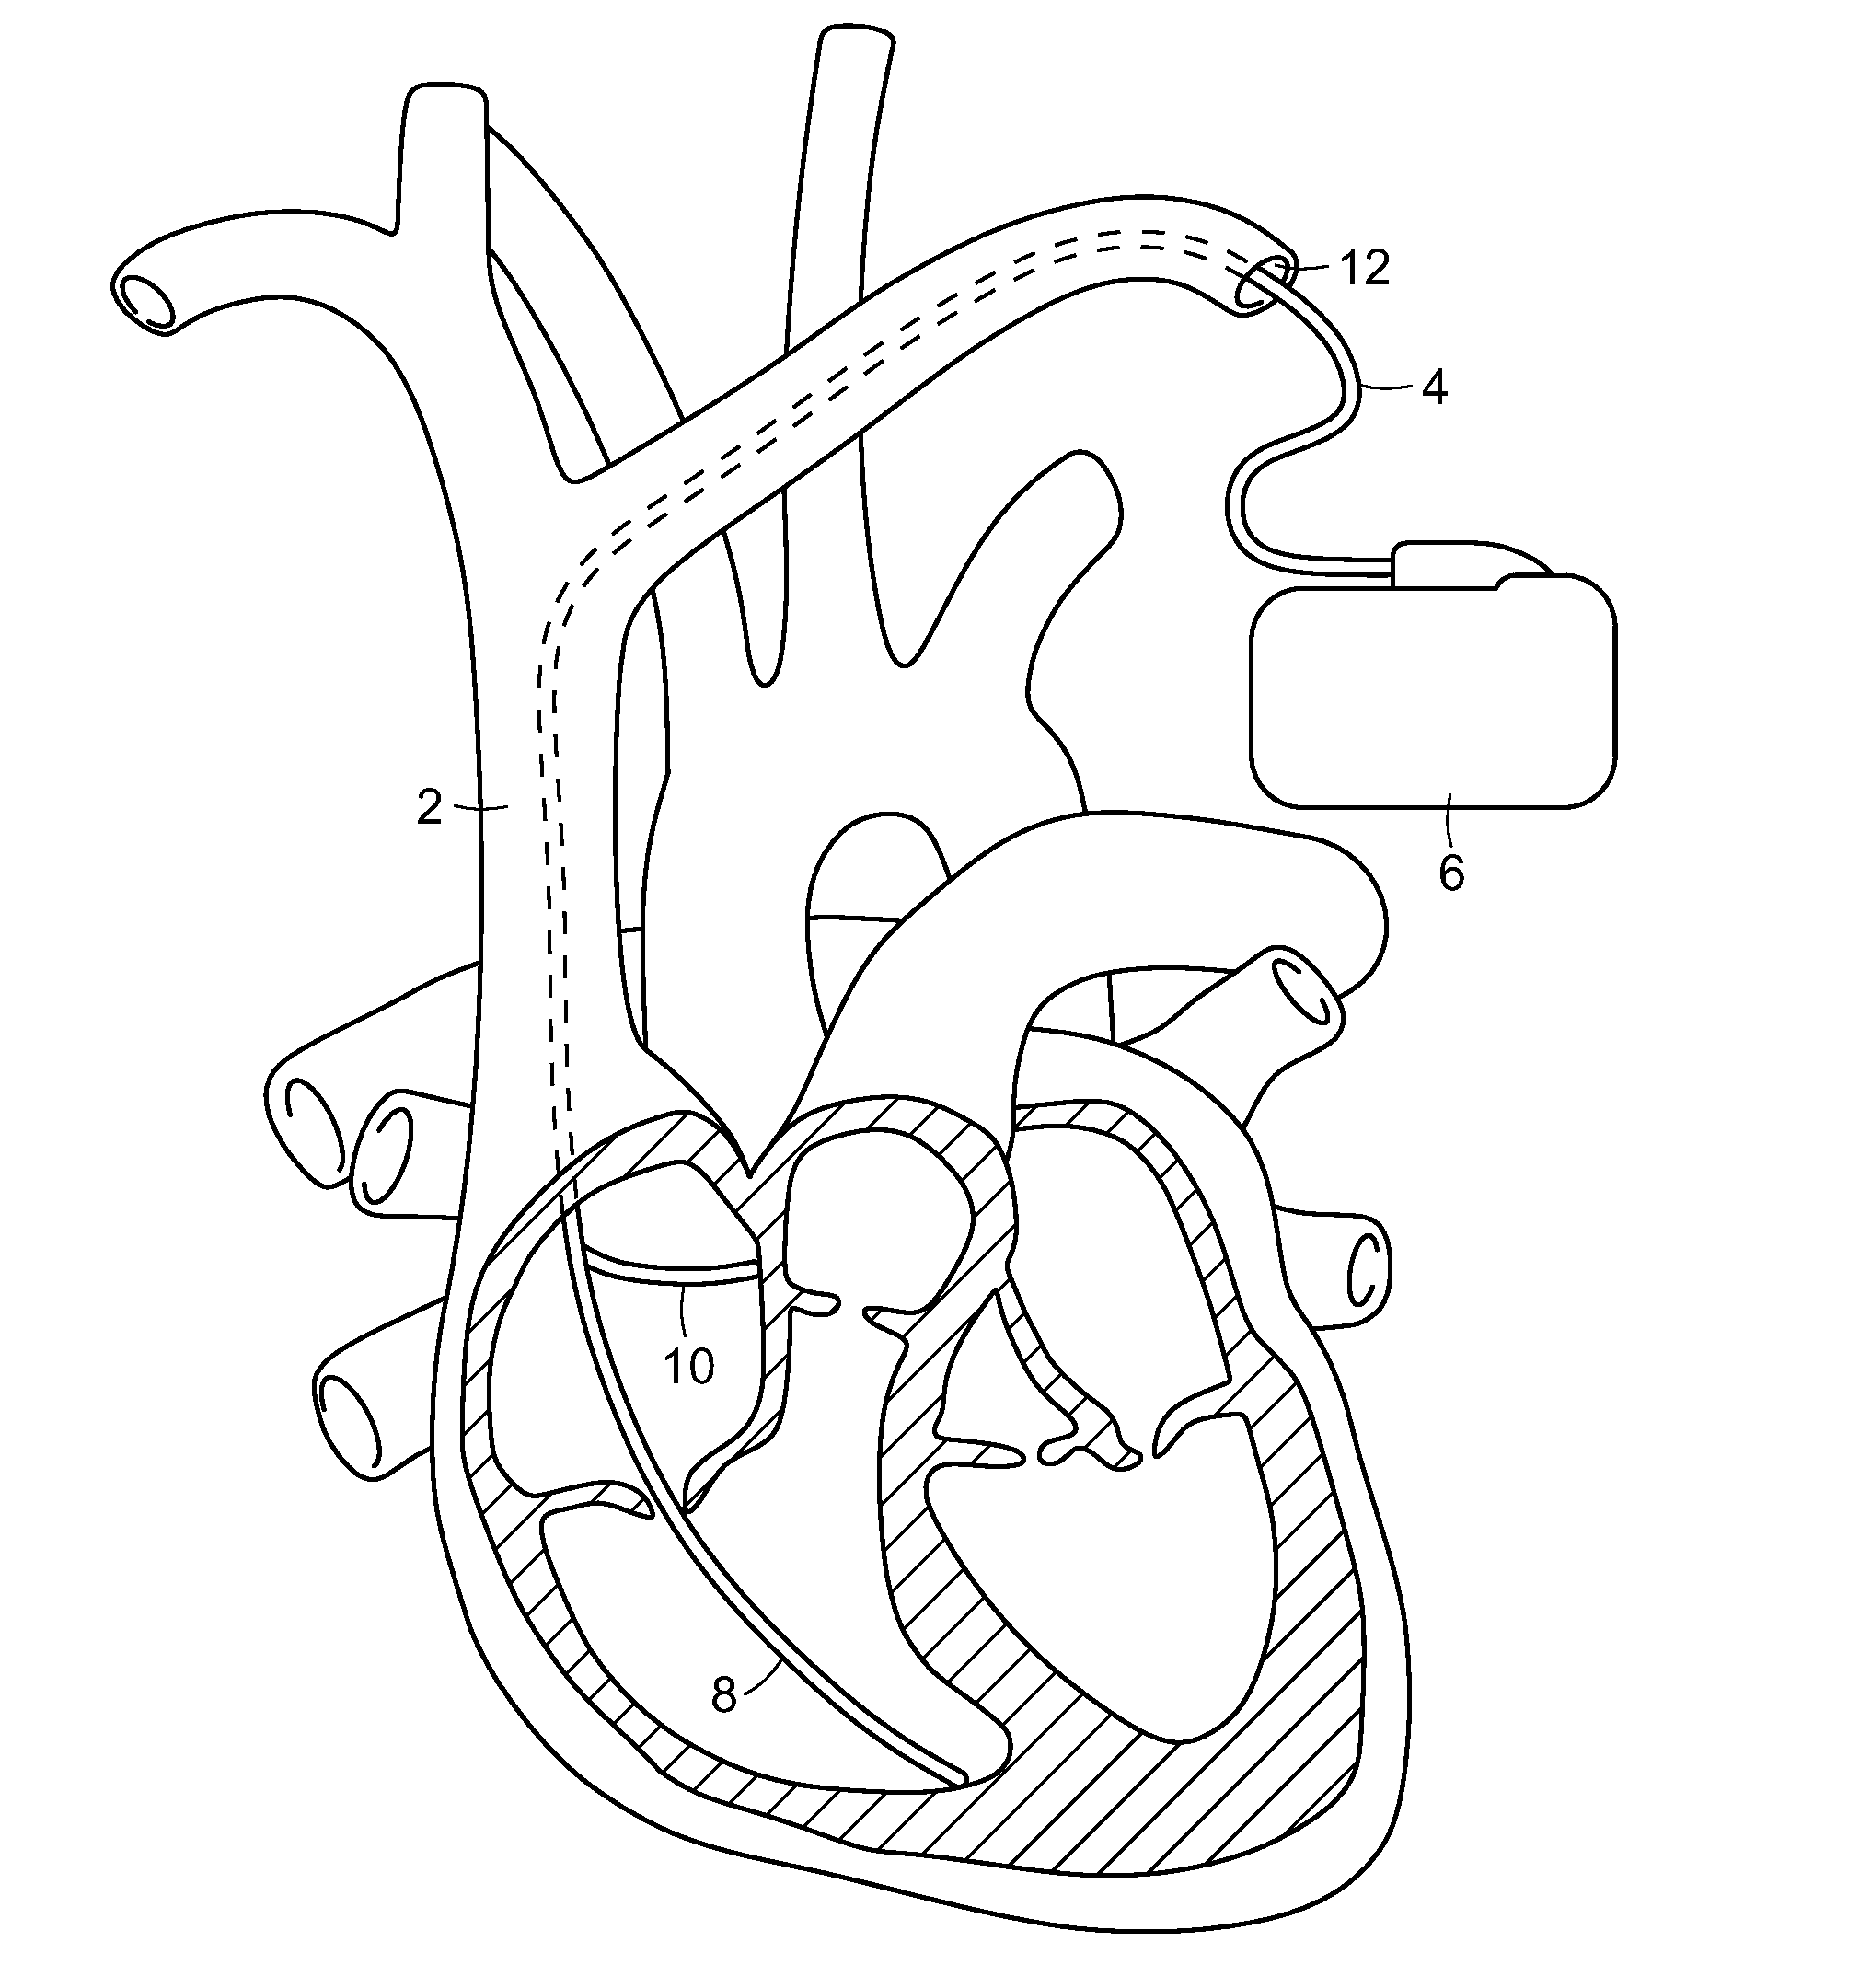 Cardiac pacemaker and uses thereof